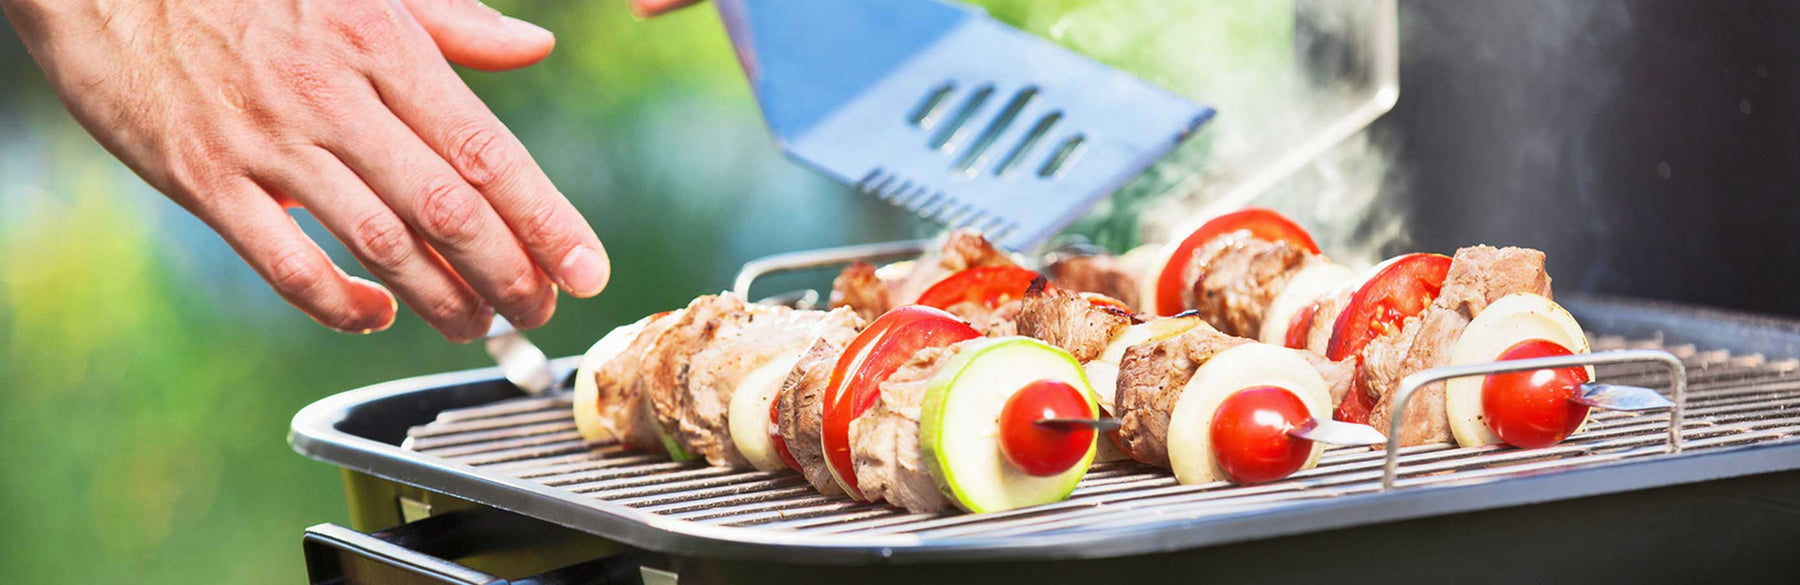 How To Become A Boss On The Grill, Part I - Great Backyard Place